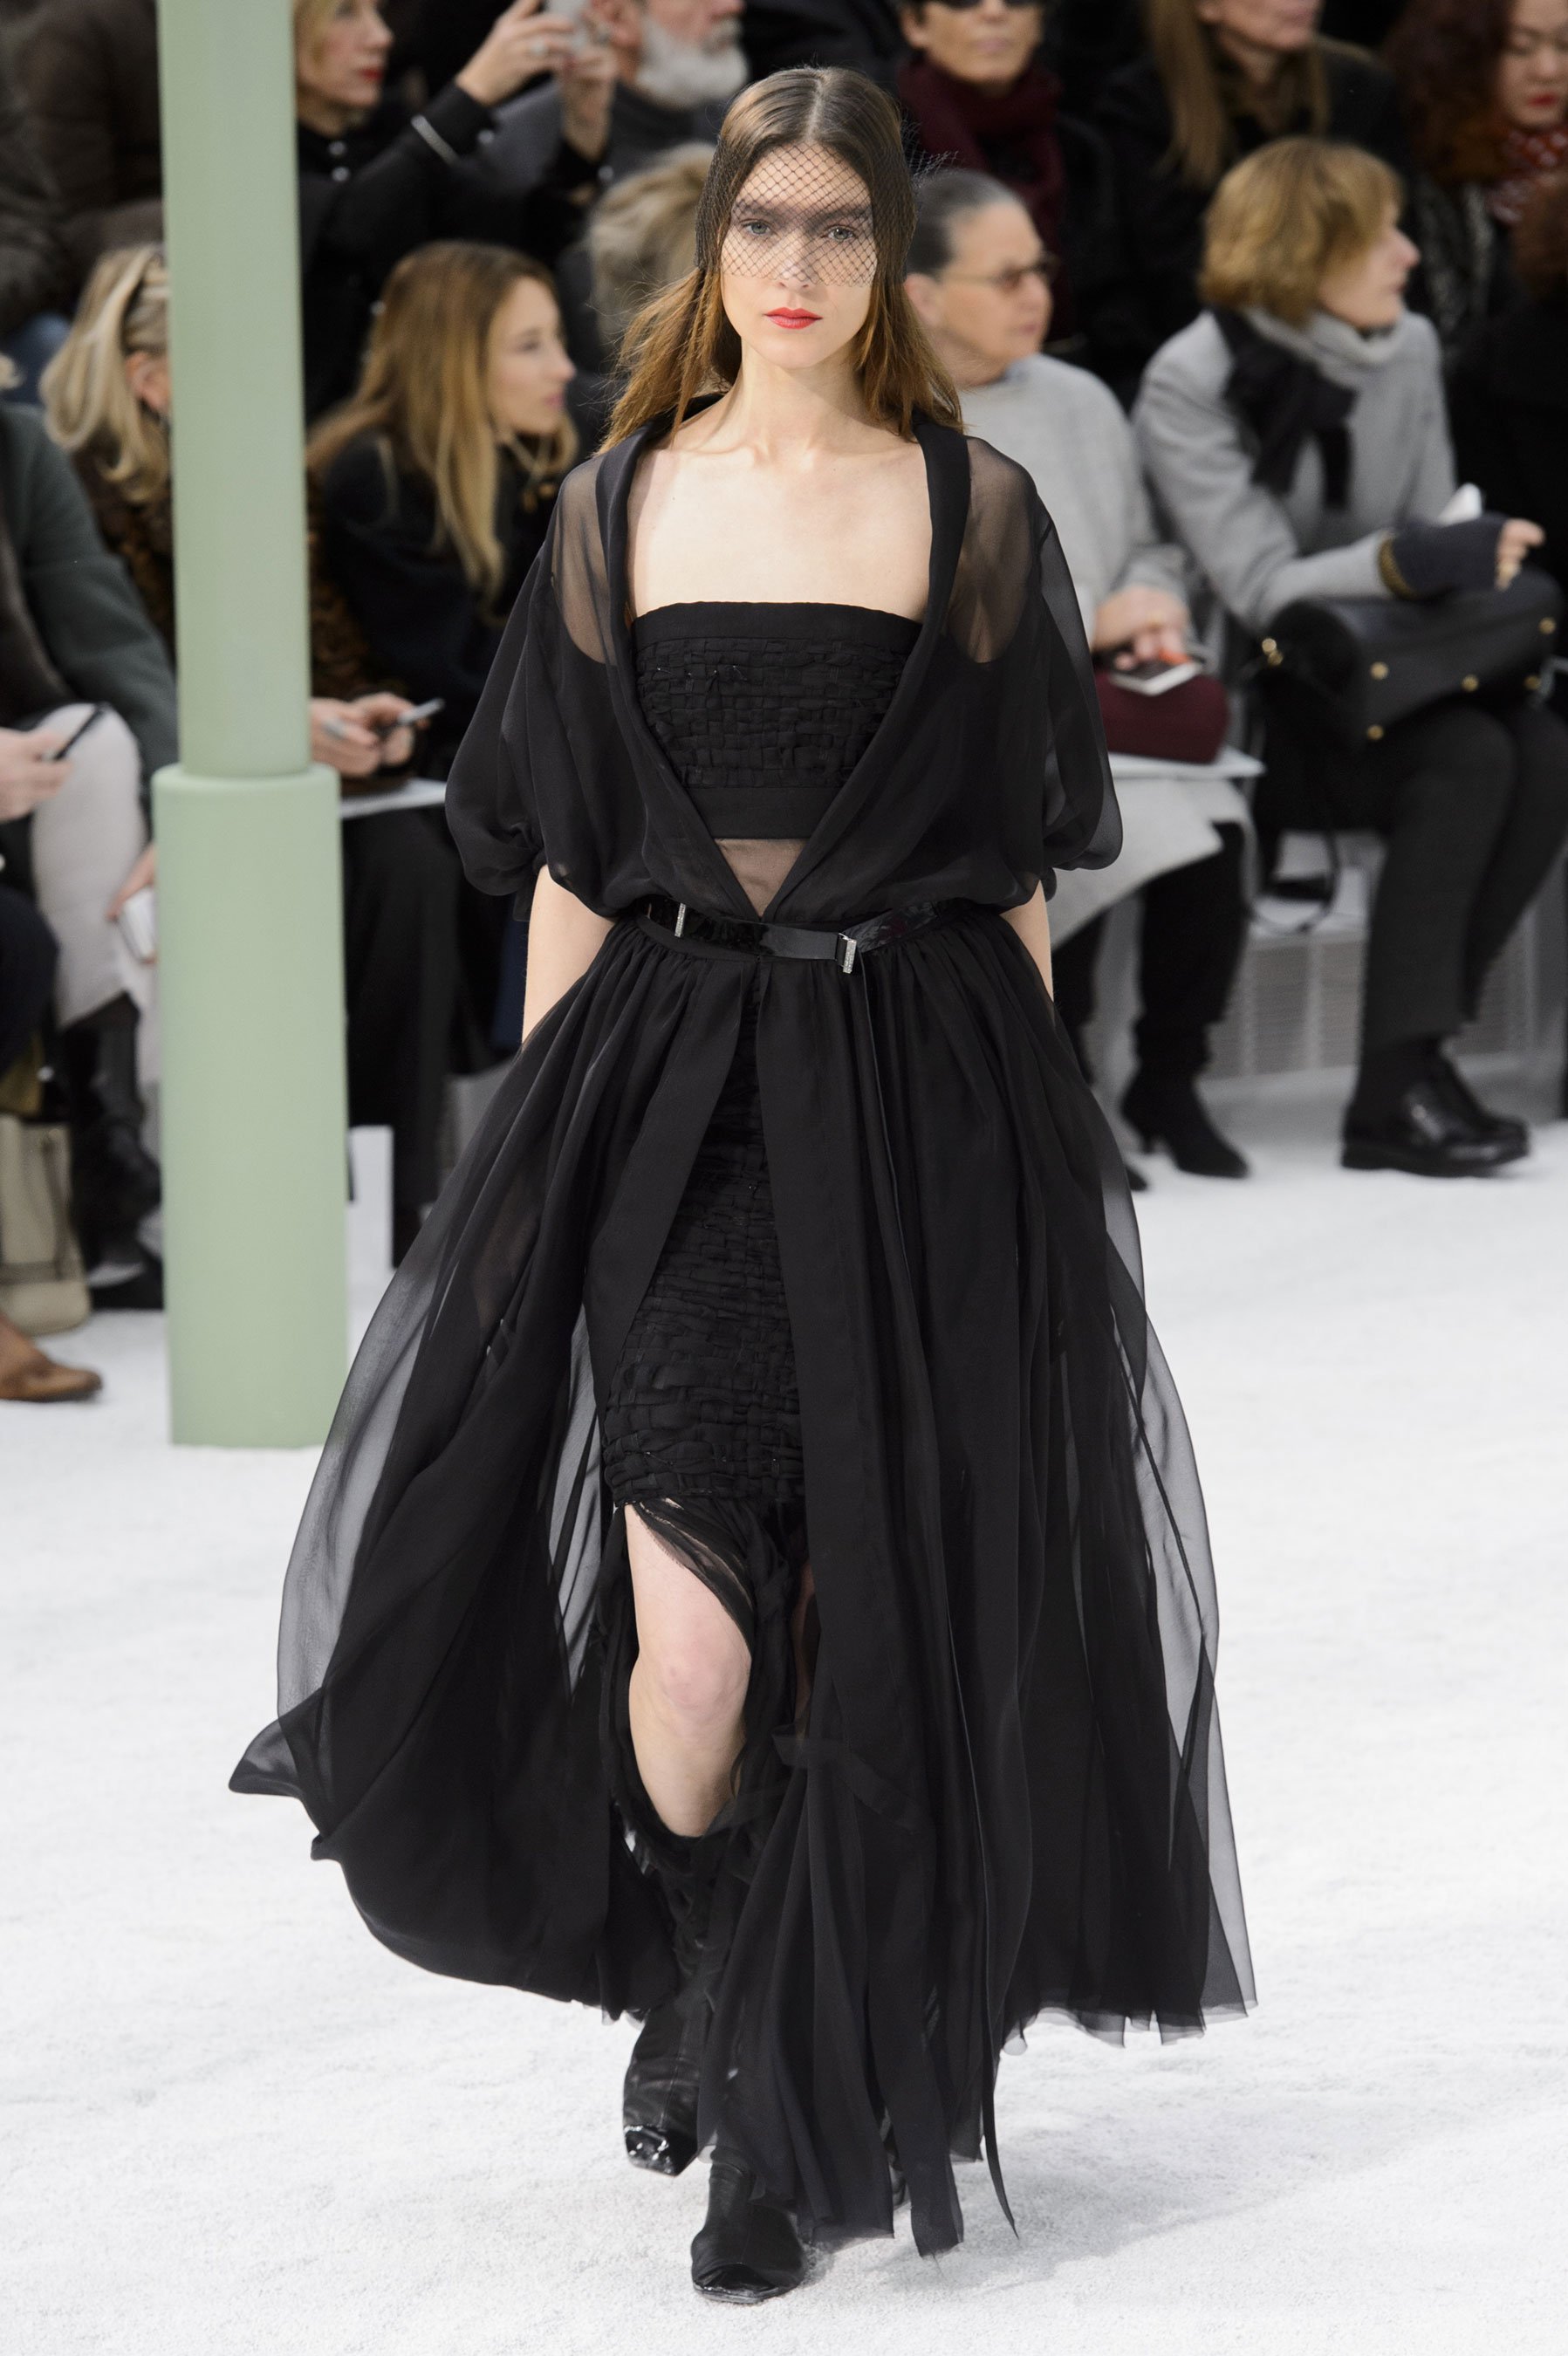 chanel haute couture spring 2015 pfw 36 kati